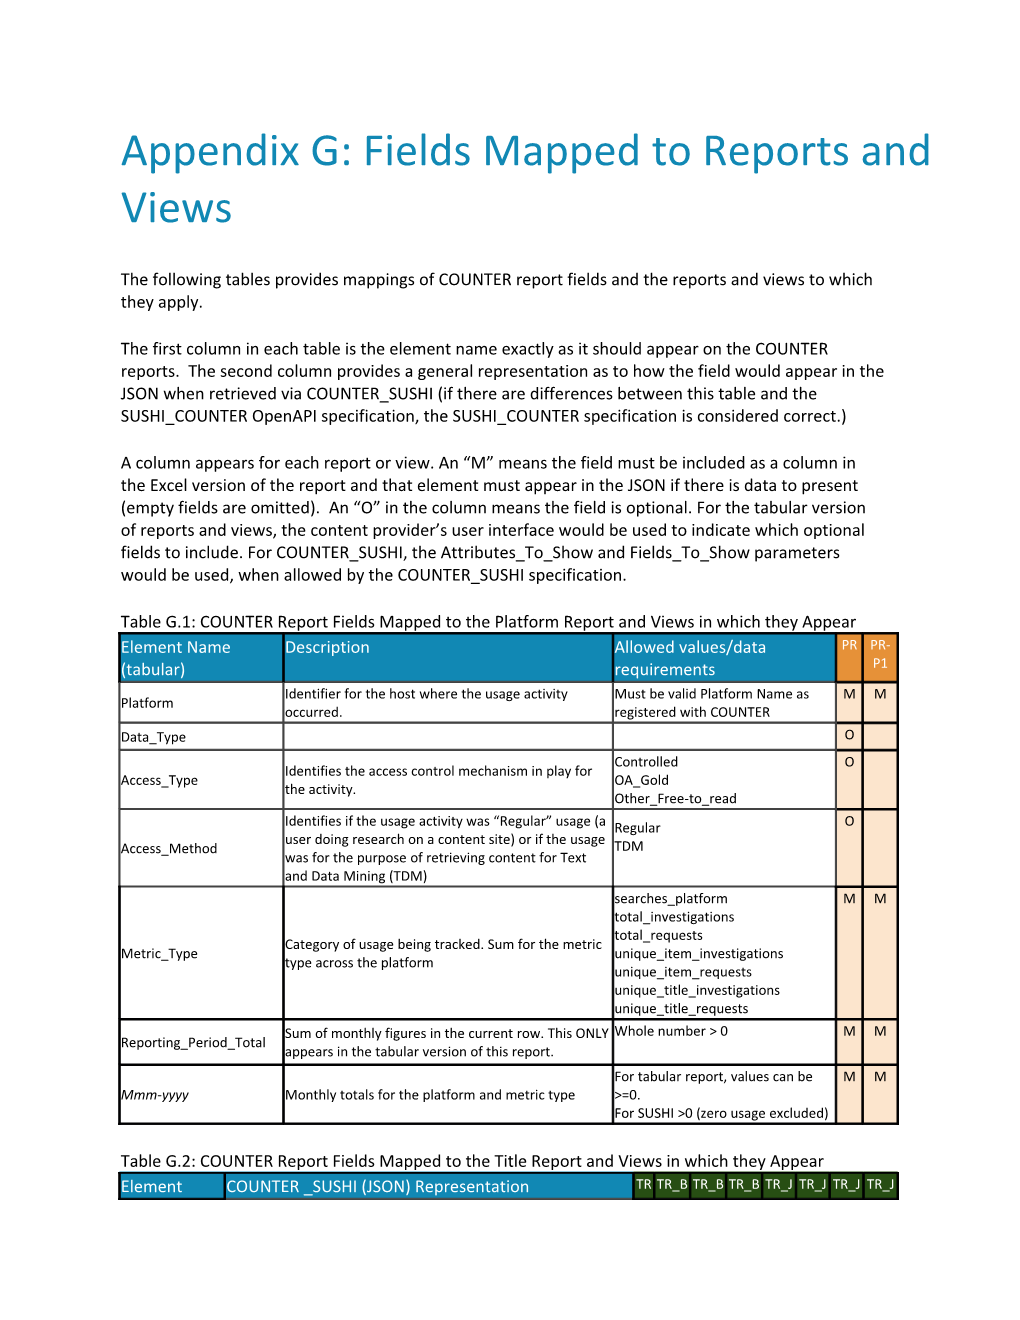 Appendix G: Fields Mapped to Reports and Views